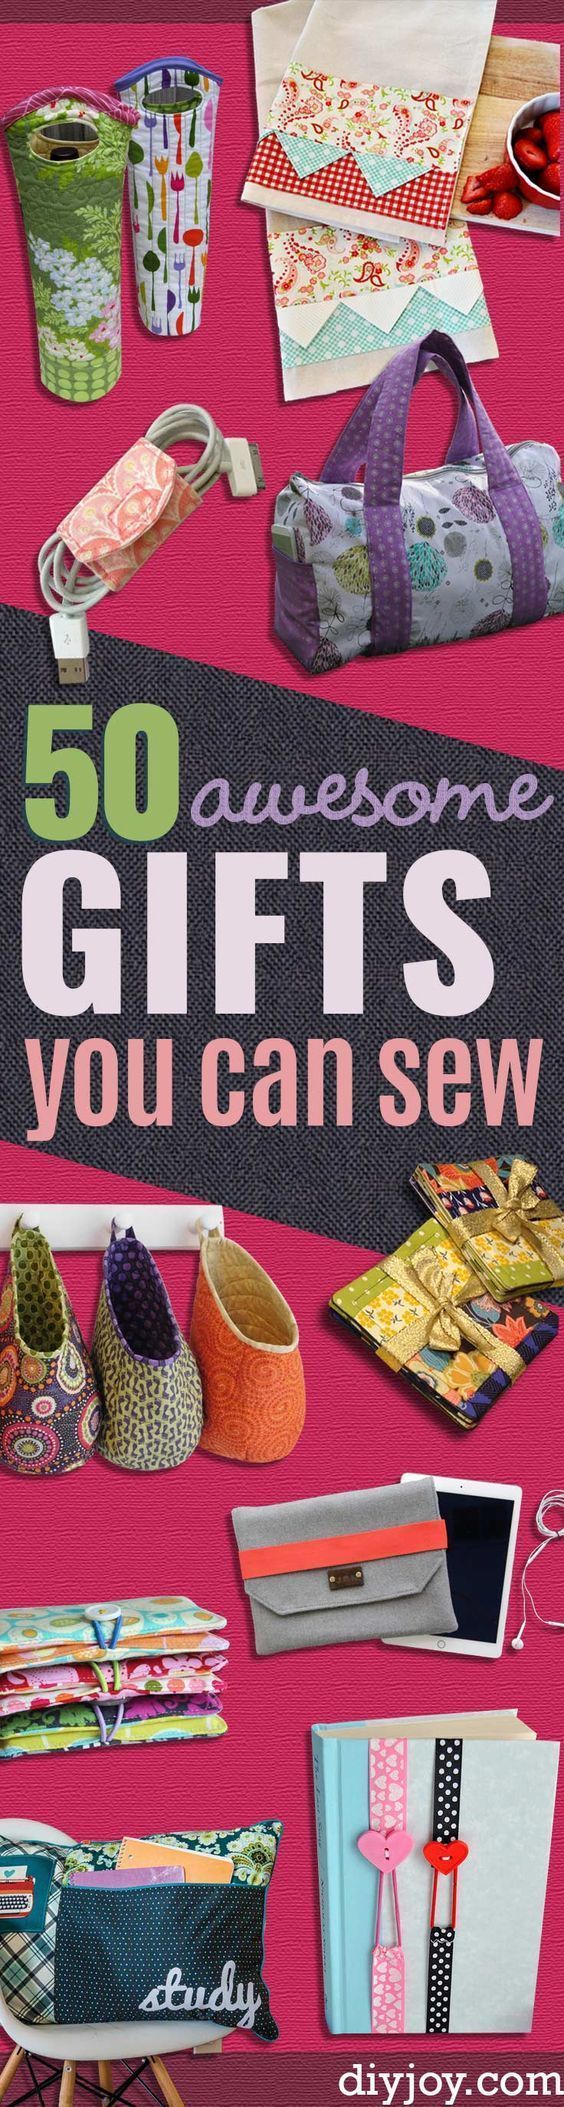 DIY Sewing Gift Ideas for Adults and Kids, Teens, Women, Men and Baby – Cute and Easy DIY Sewing Projects Make Awesome Presents